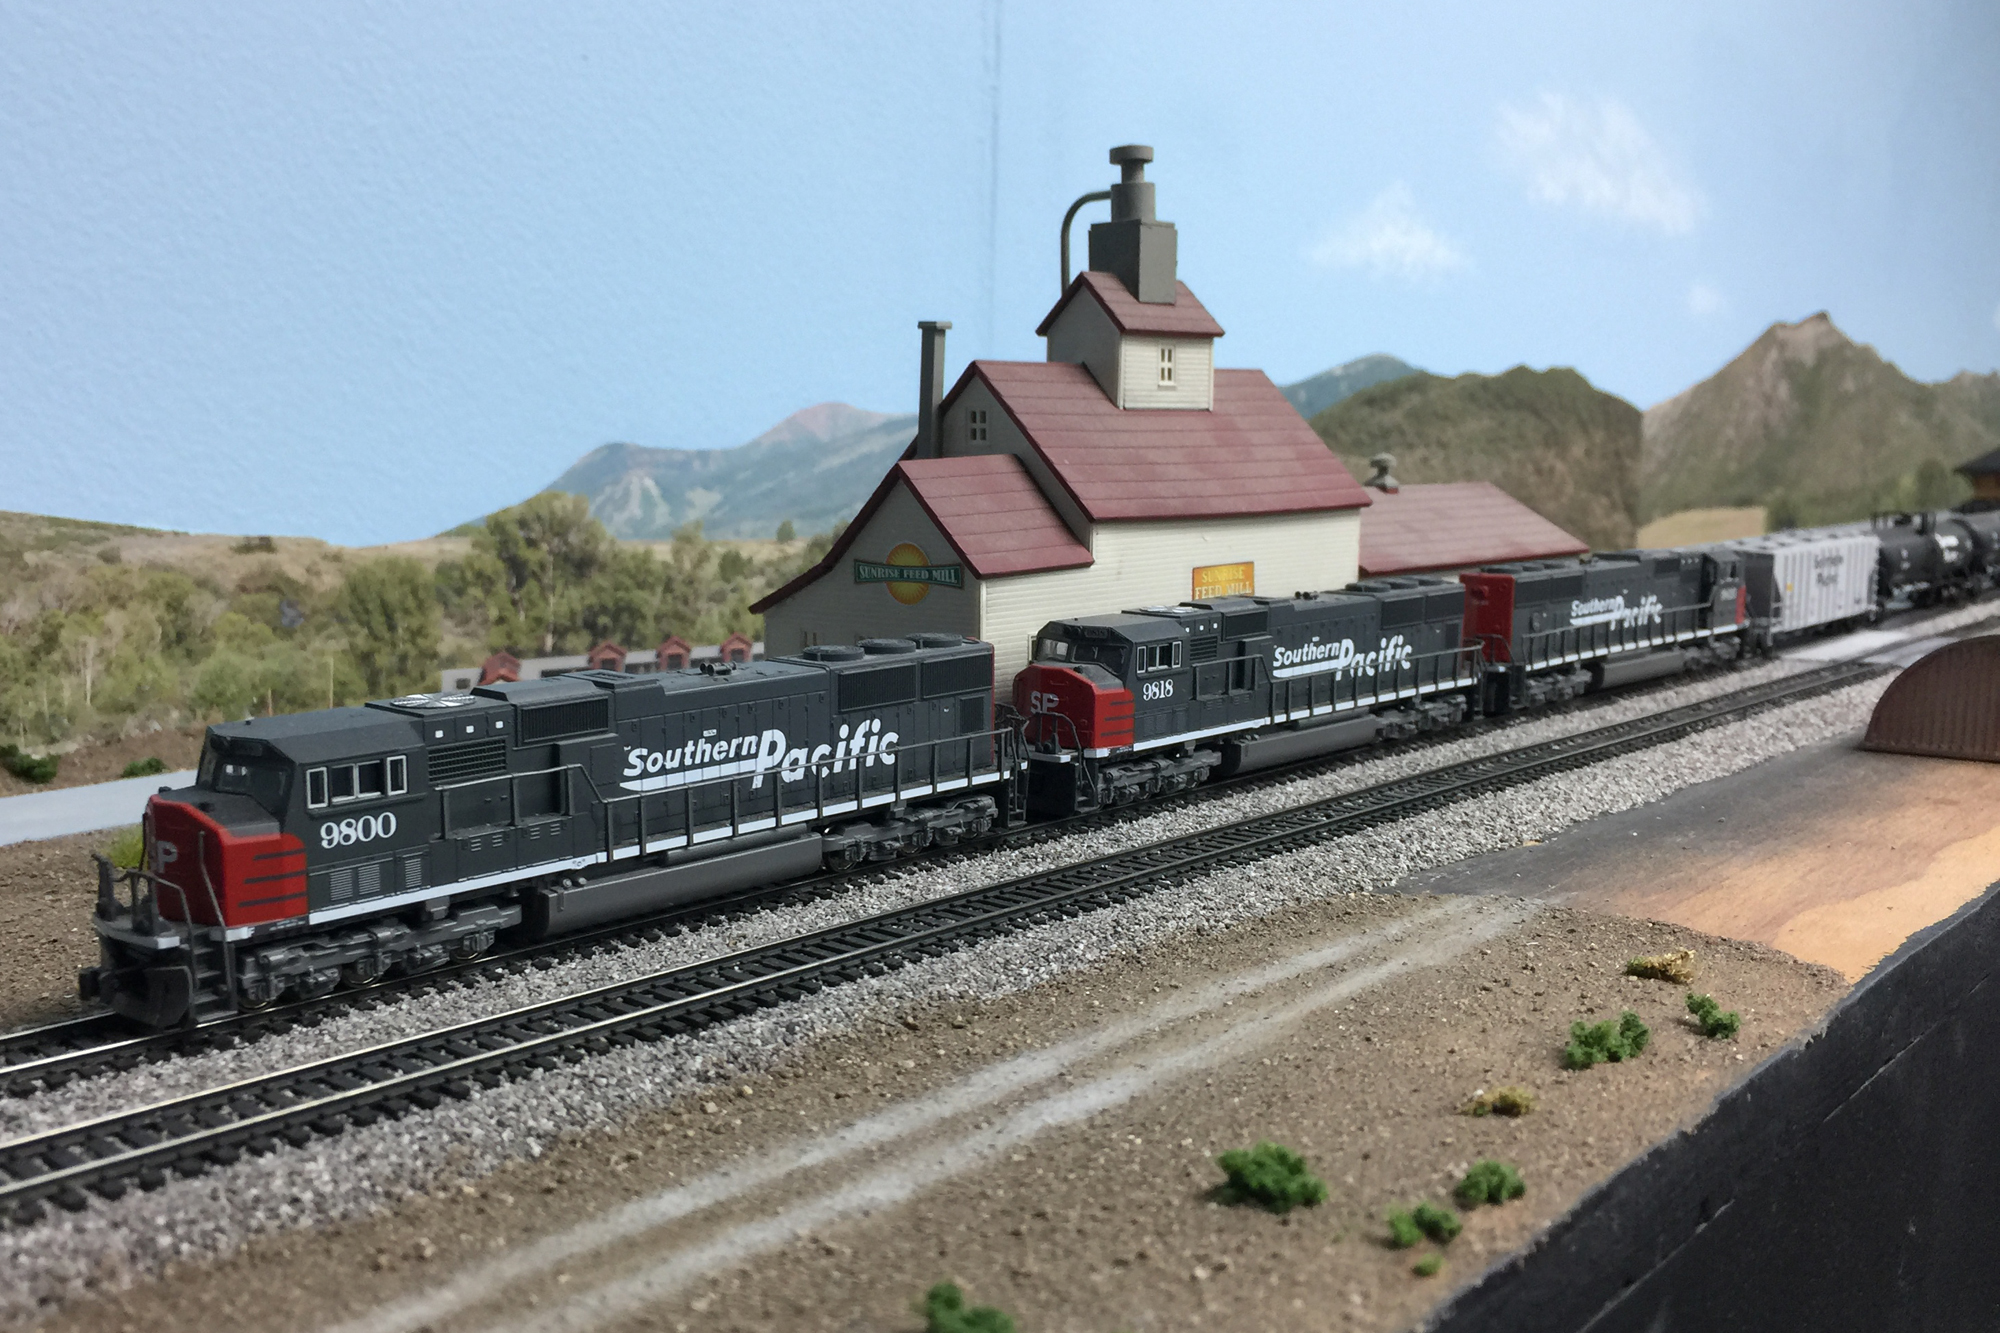 N Scale freight train and layout by Don Fowler, Master Model Railroader®, San Diego Division member.